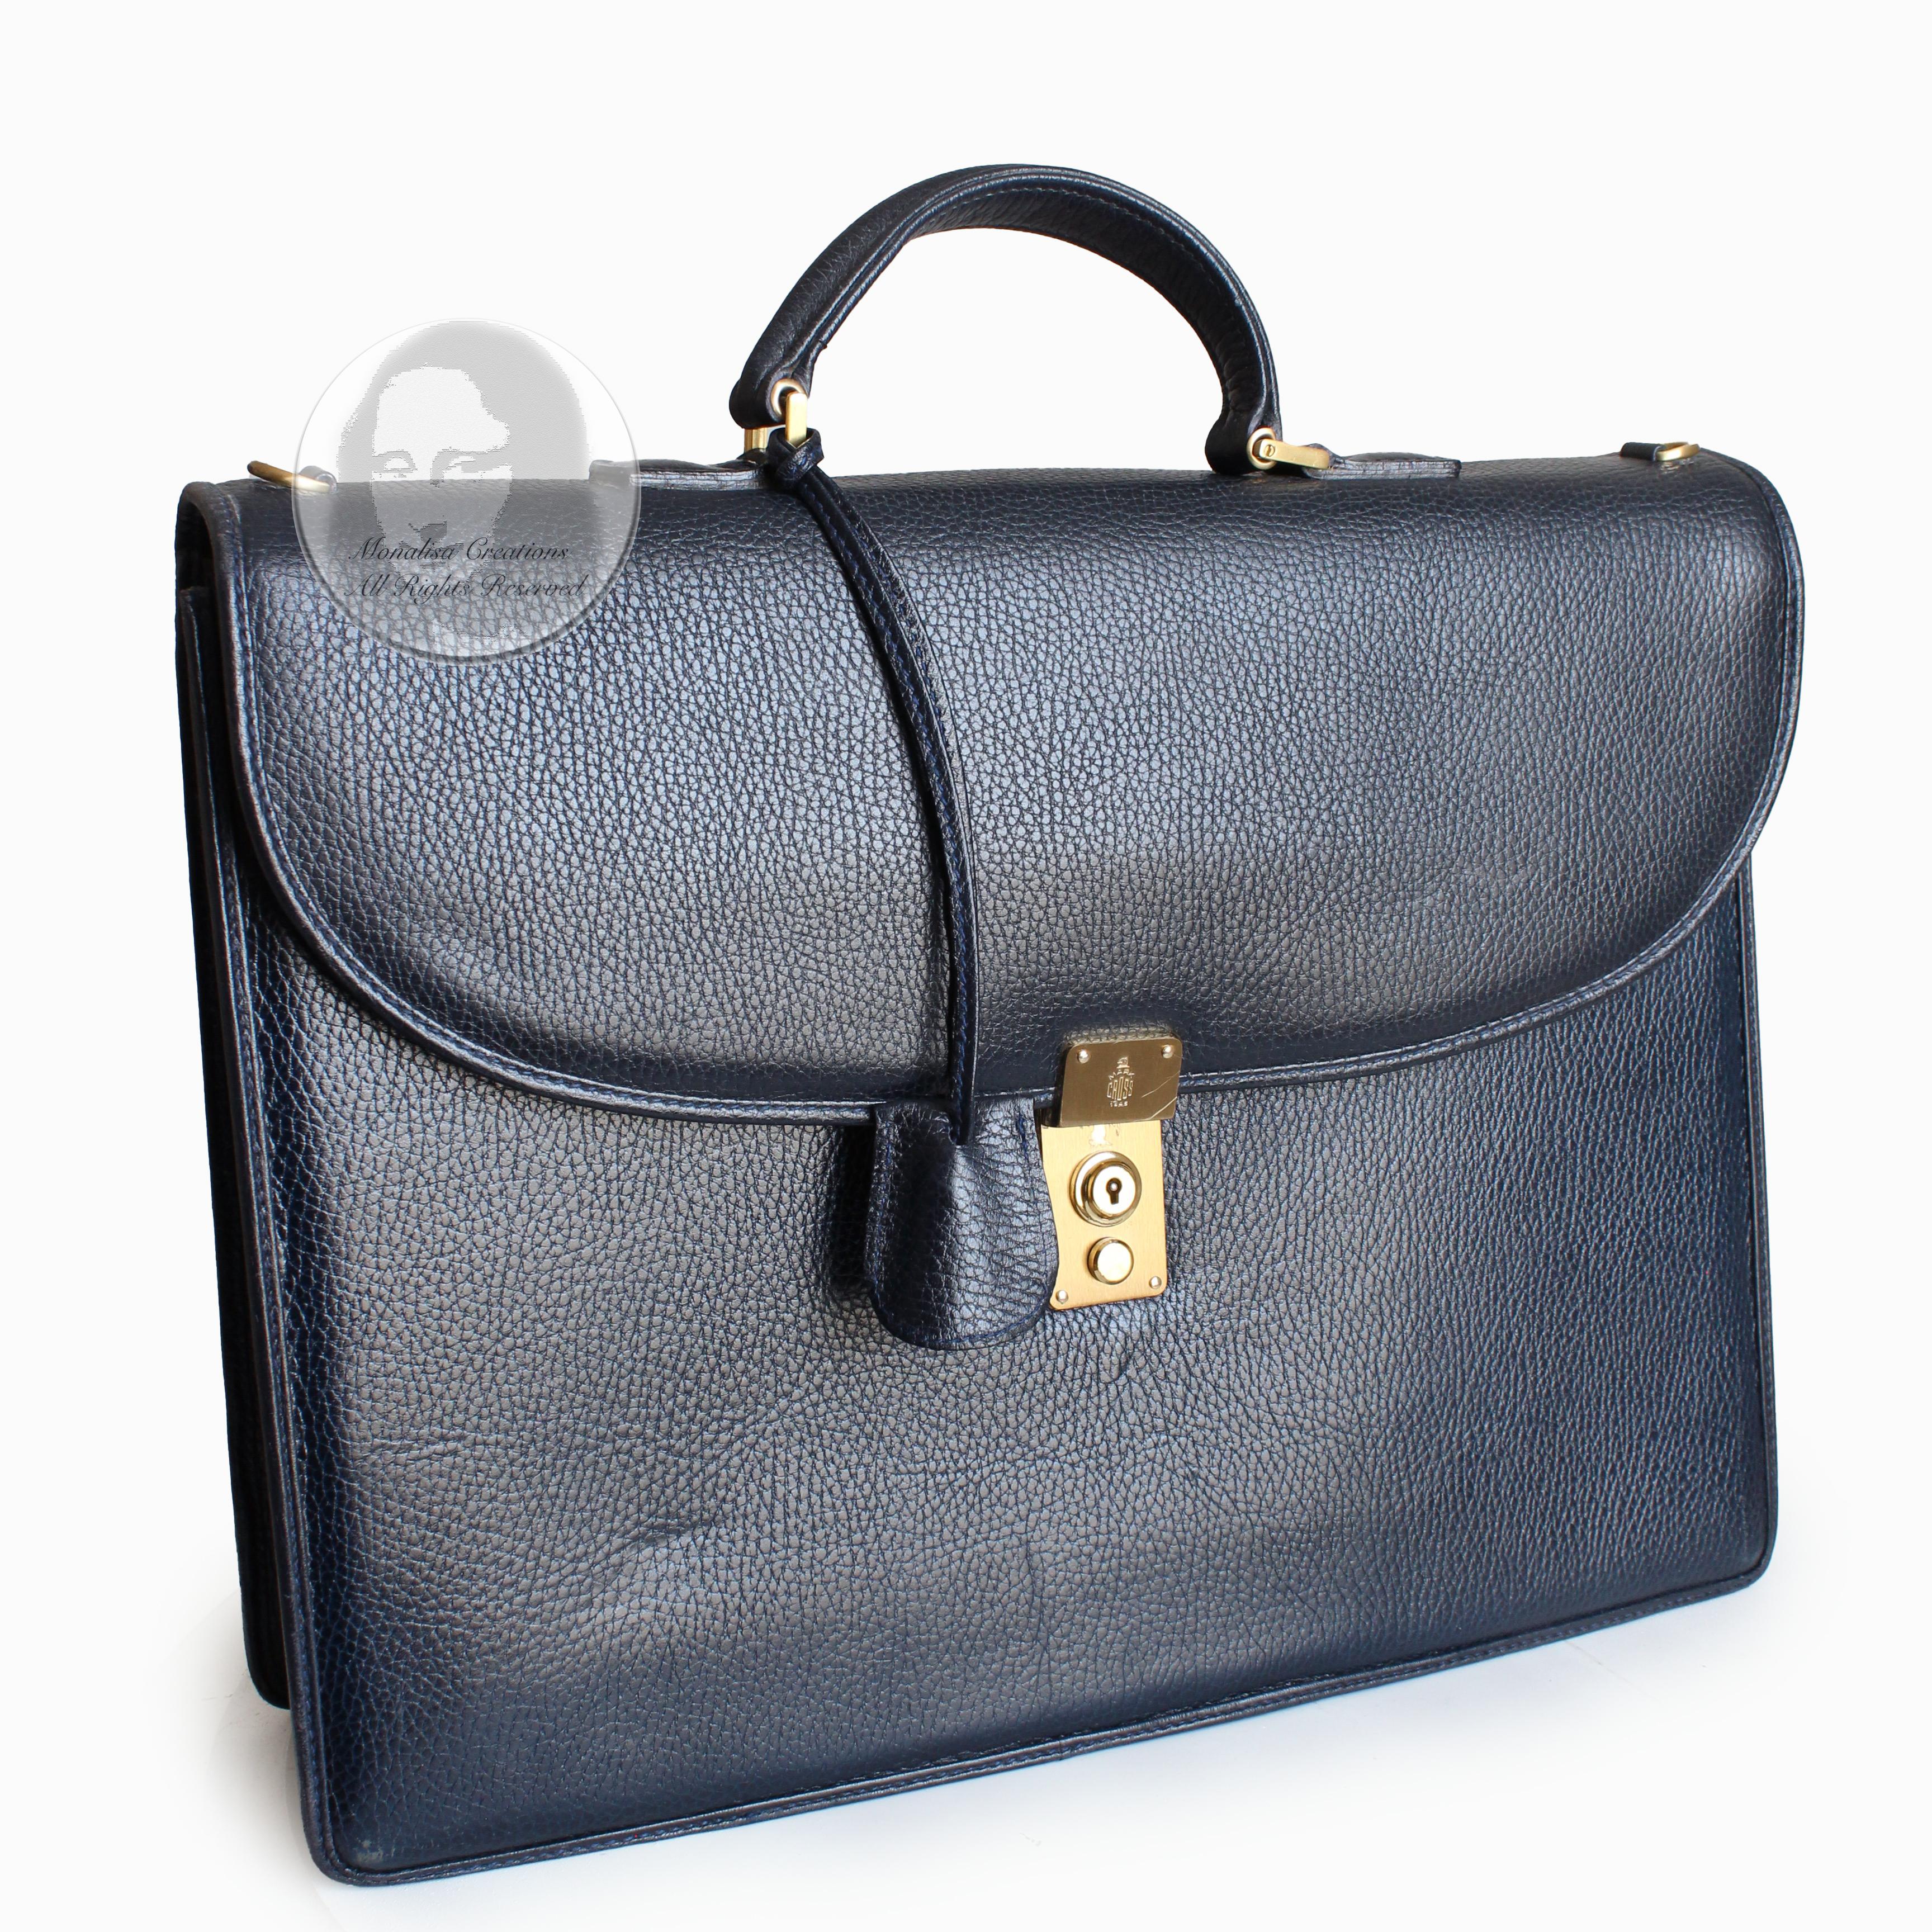 Authentic, preowned, vintage Mark Cross portfolio briefcase bag, likely made in the early 1990s. Made from a blue textured leather, it features a large flat pocket in back, a locking front latch and comes with its matching key case and two gold